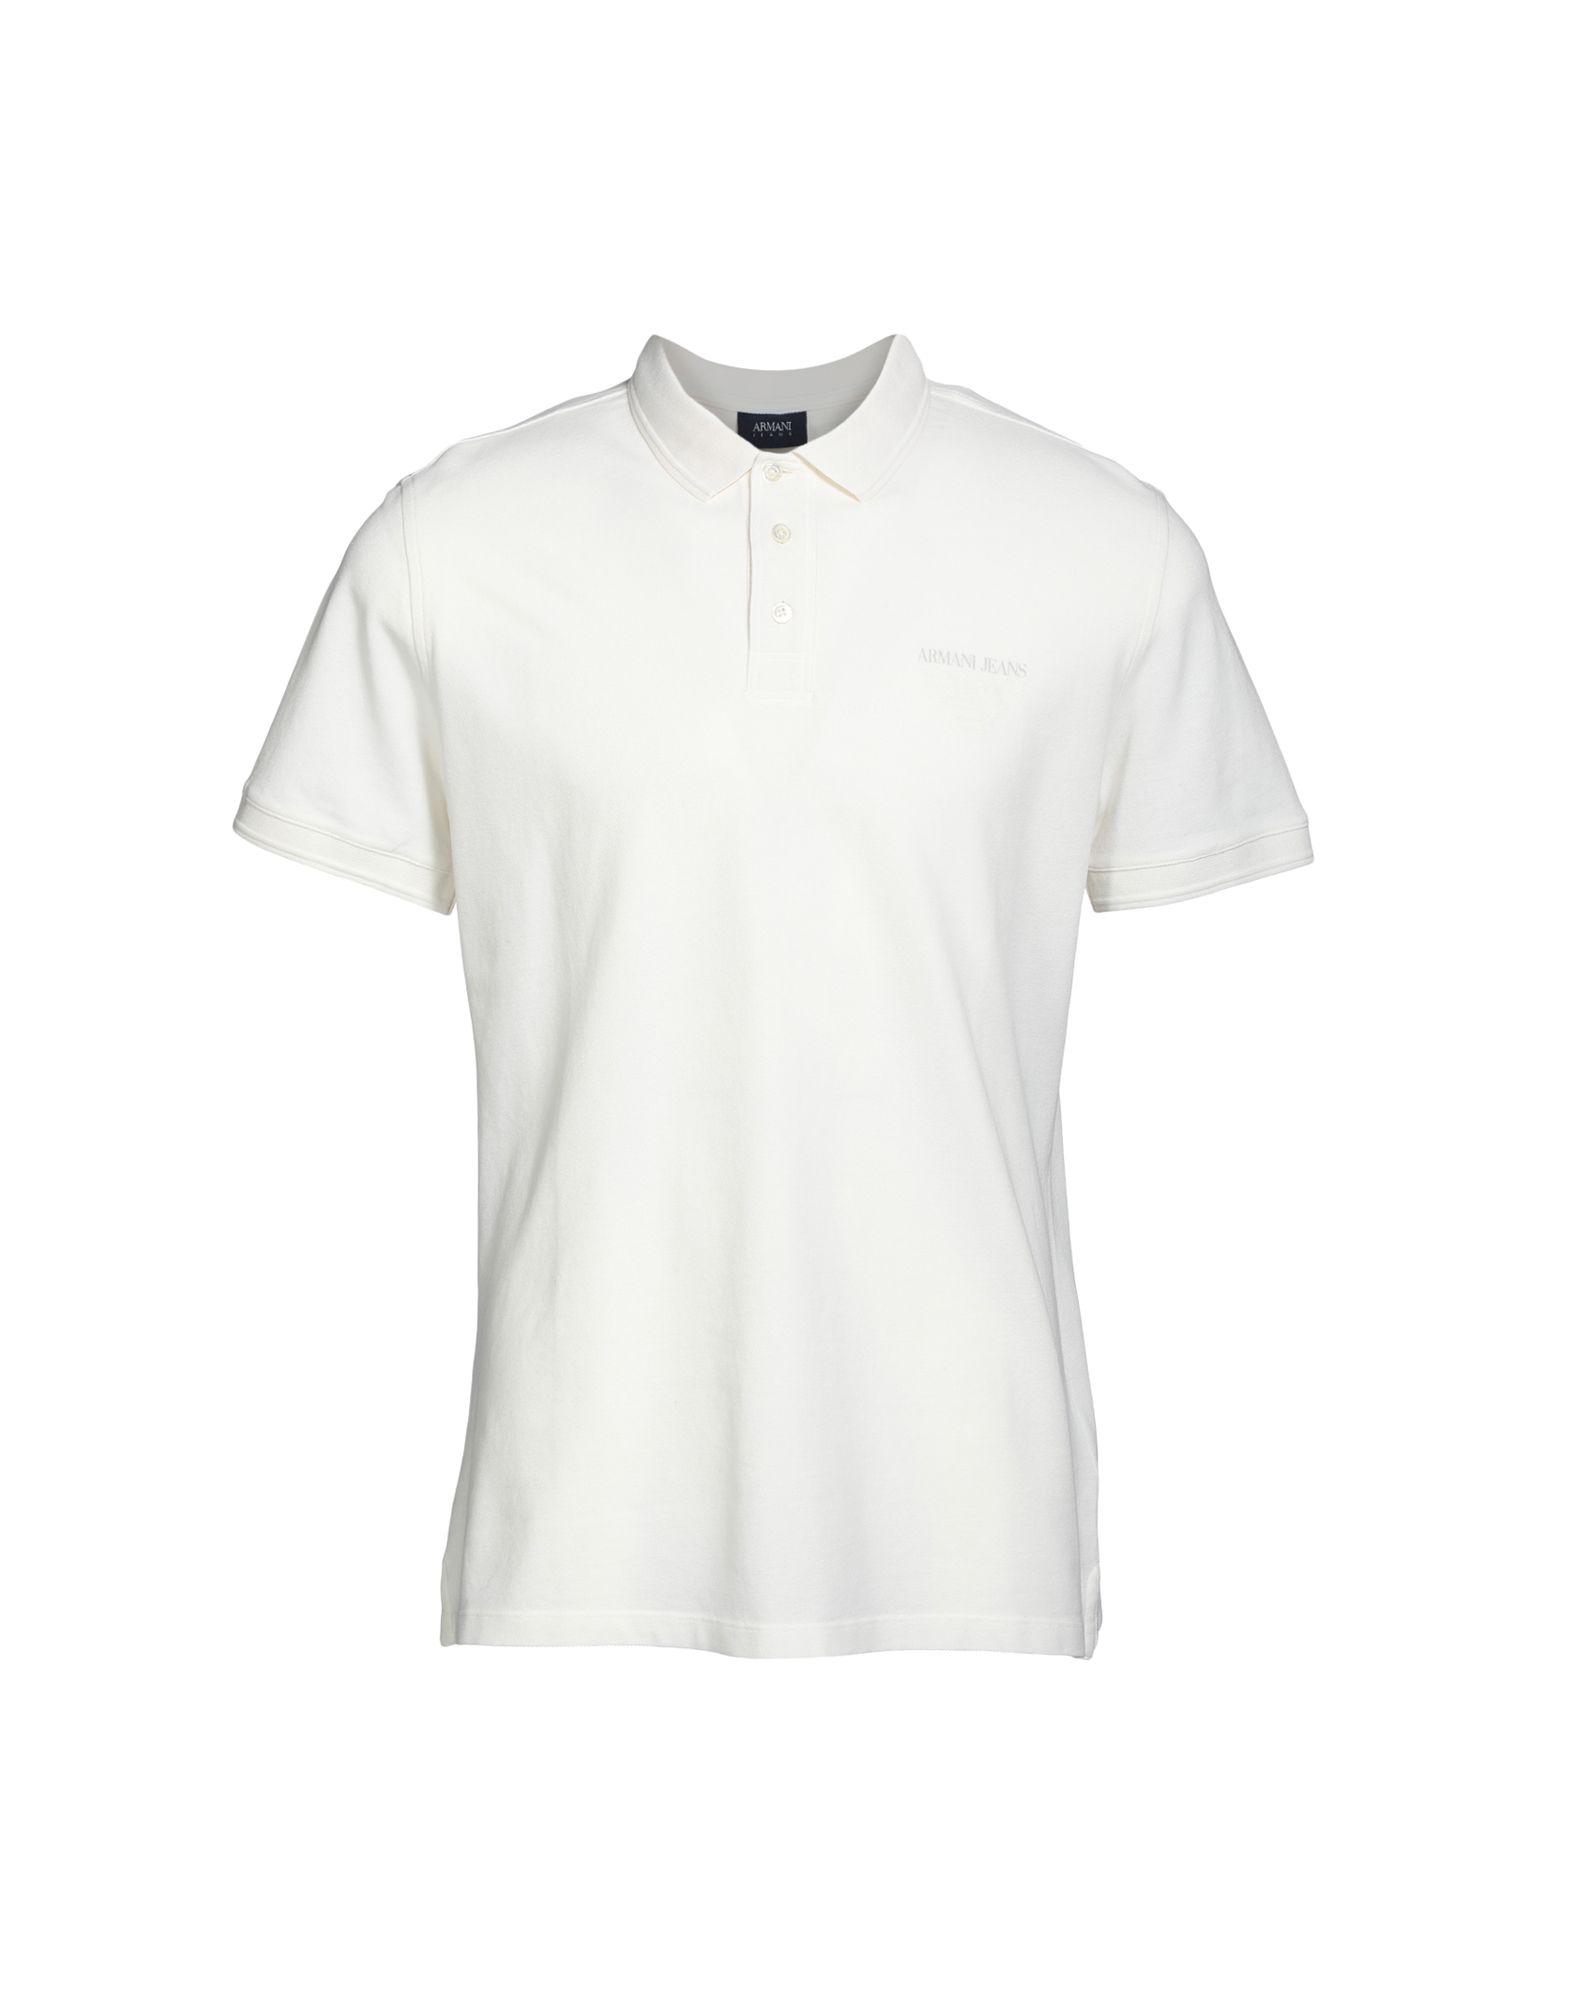 Armani Jeans Cotton Polo Shirt in White for Men - Lyst